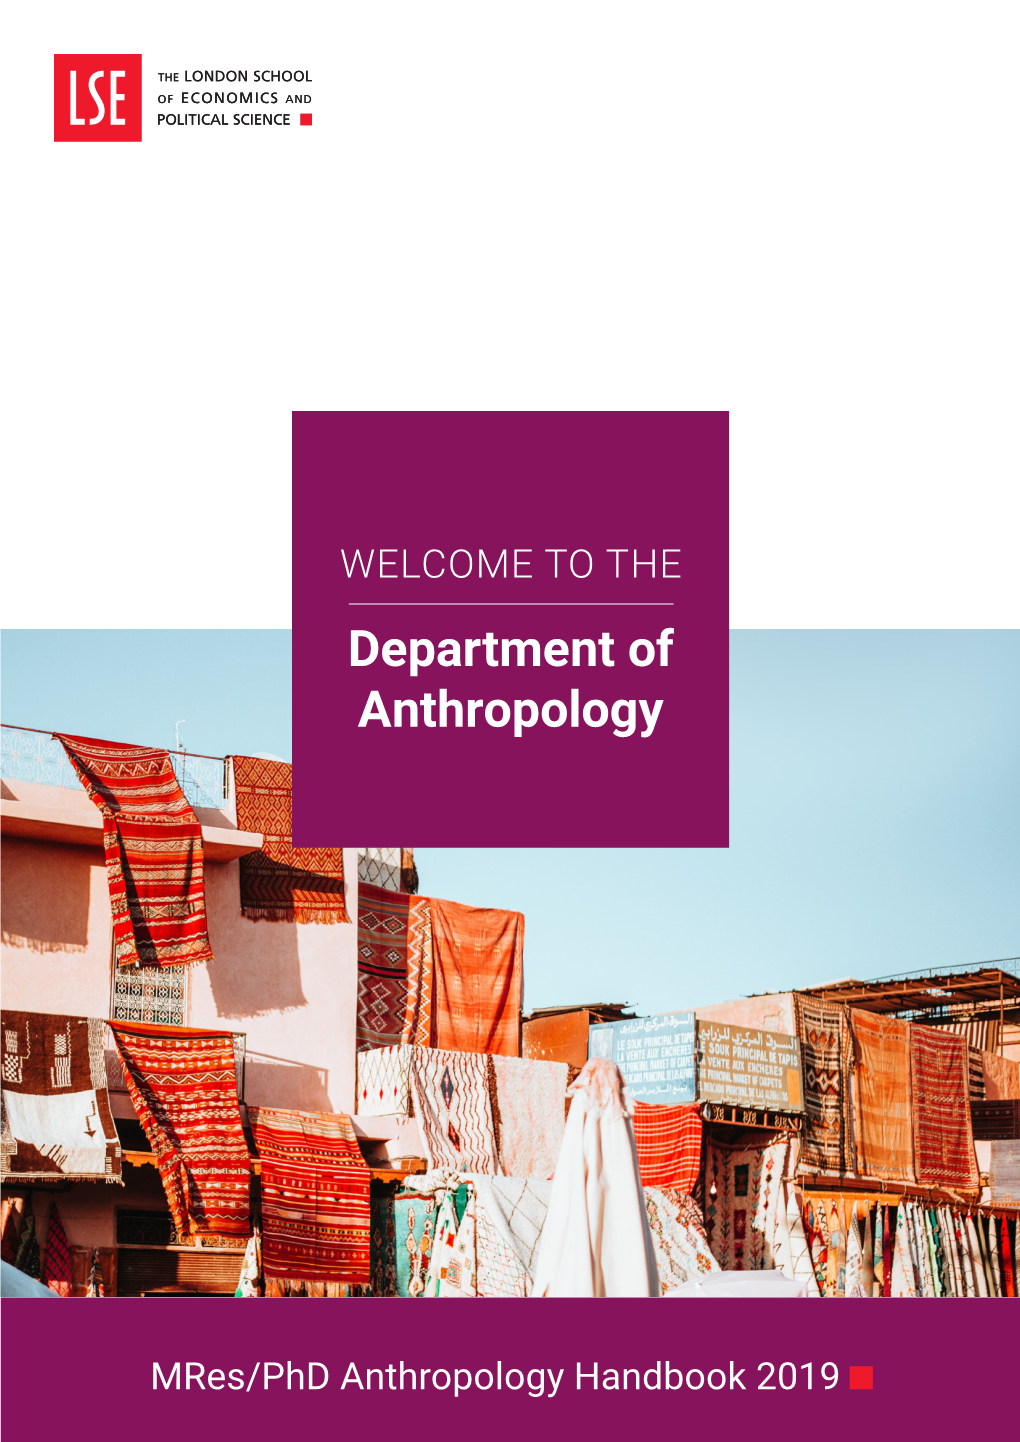 Mres/Phd Anthropology Handbook 2019 Dates for Your Diary 2019/20